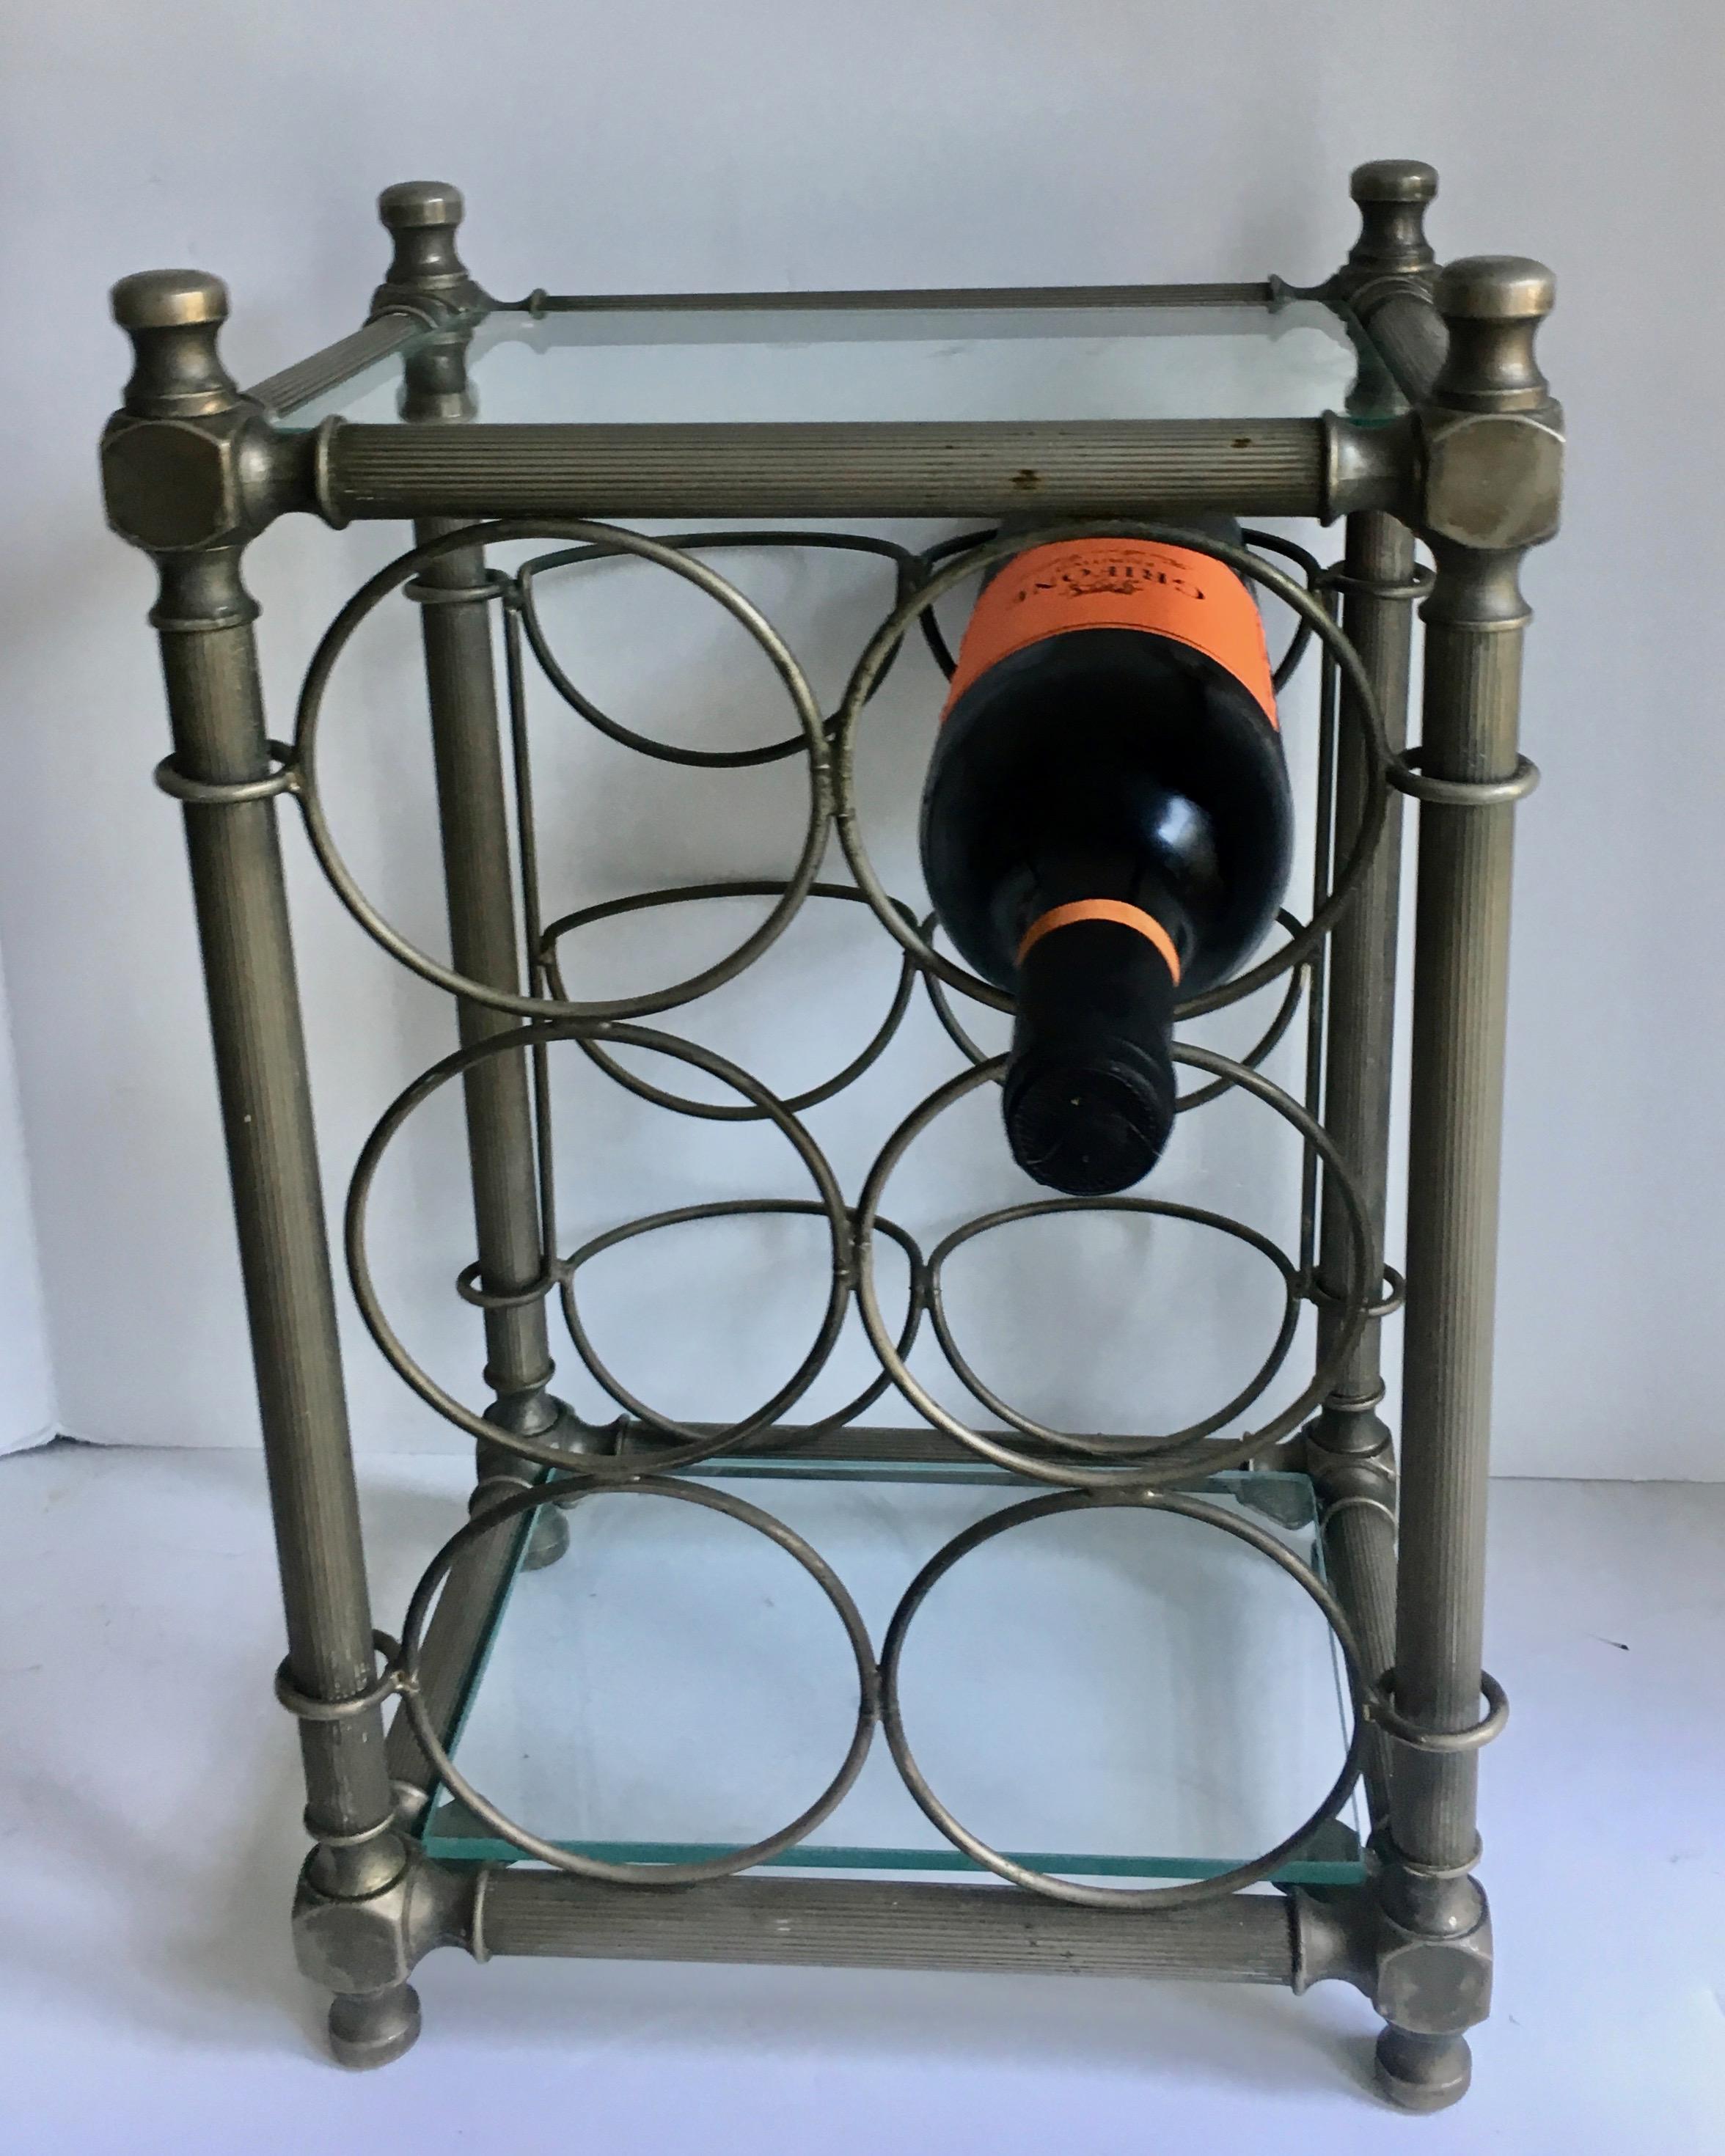 Six bottle wine champagne holder - convenient and simple - this elegant piece will hold wine in your office, bedroom or any place you need to conveniently grab a bottle - small enough to move around with glass on top to easily hold glass or